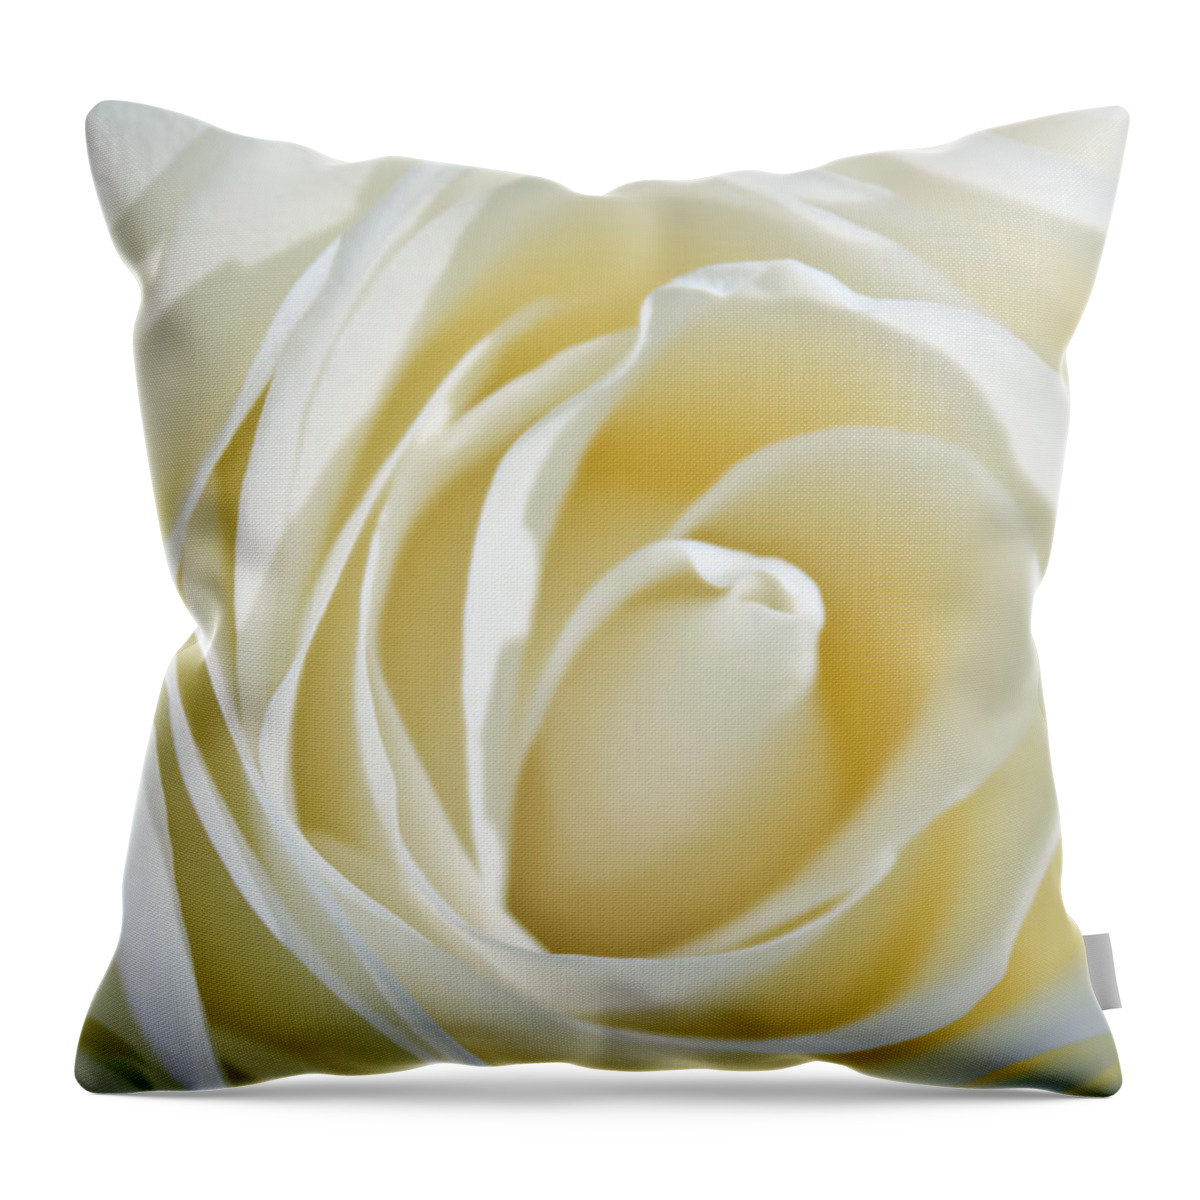 White Rose Throw Pillow featuring the photograph White Rose by Ann Murphy